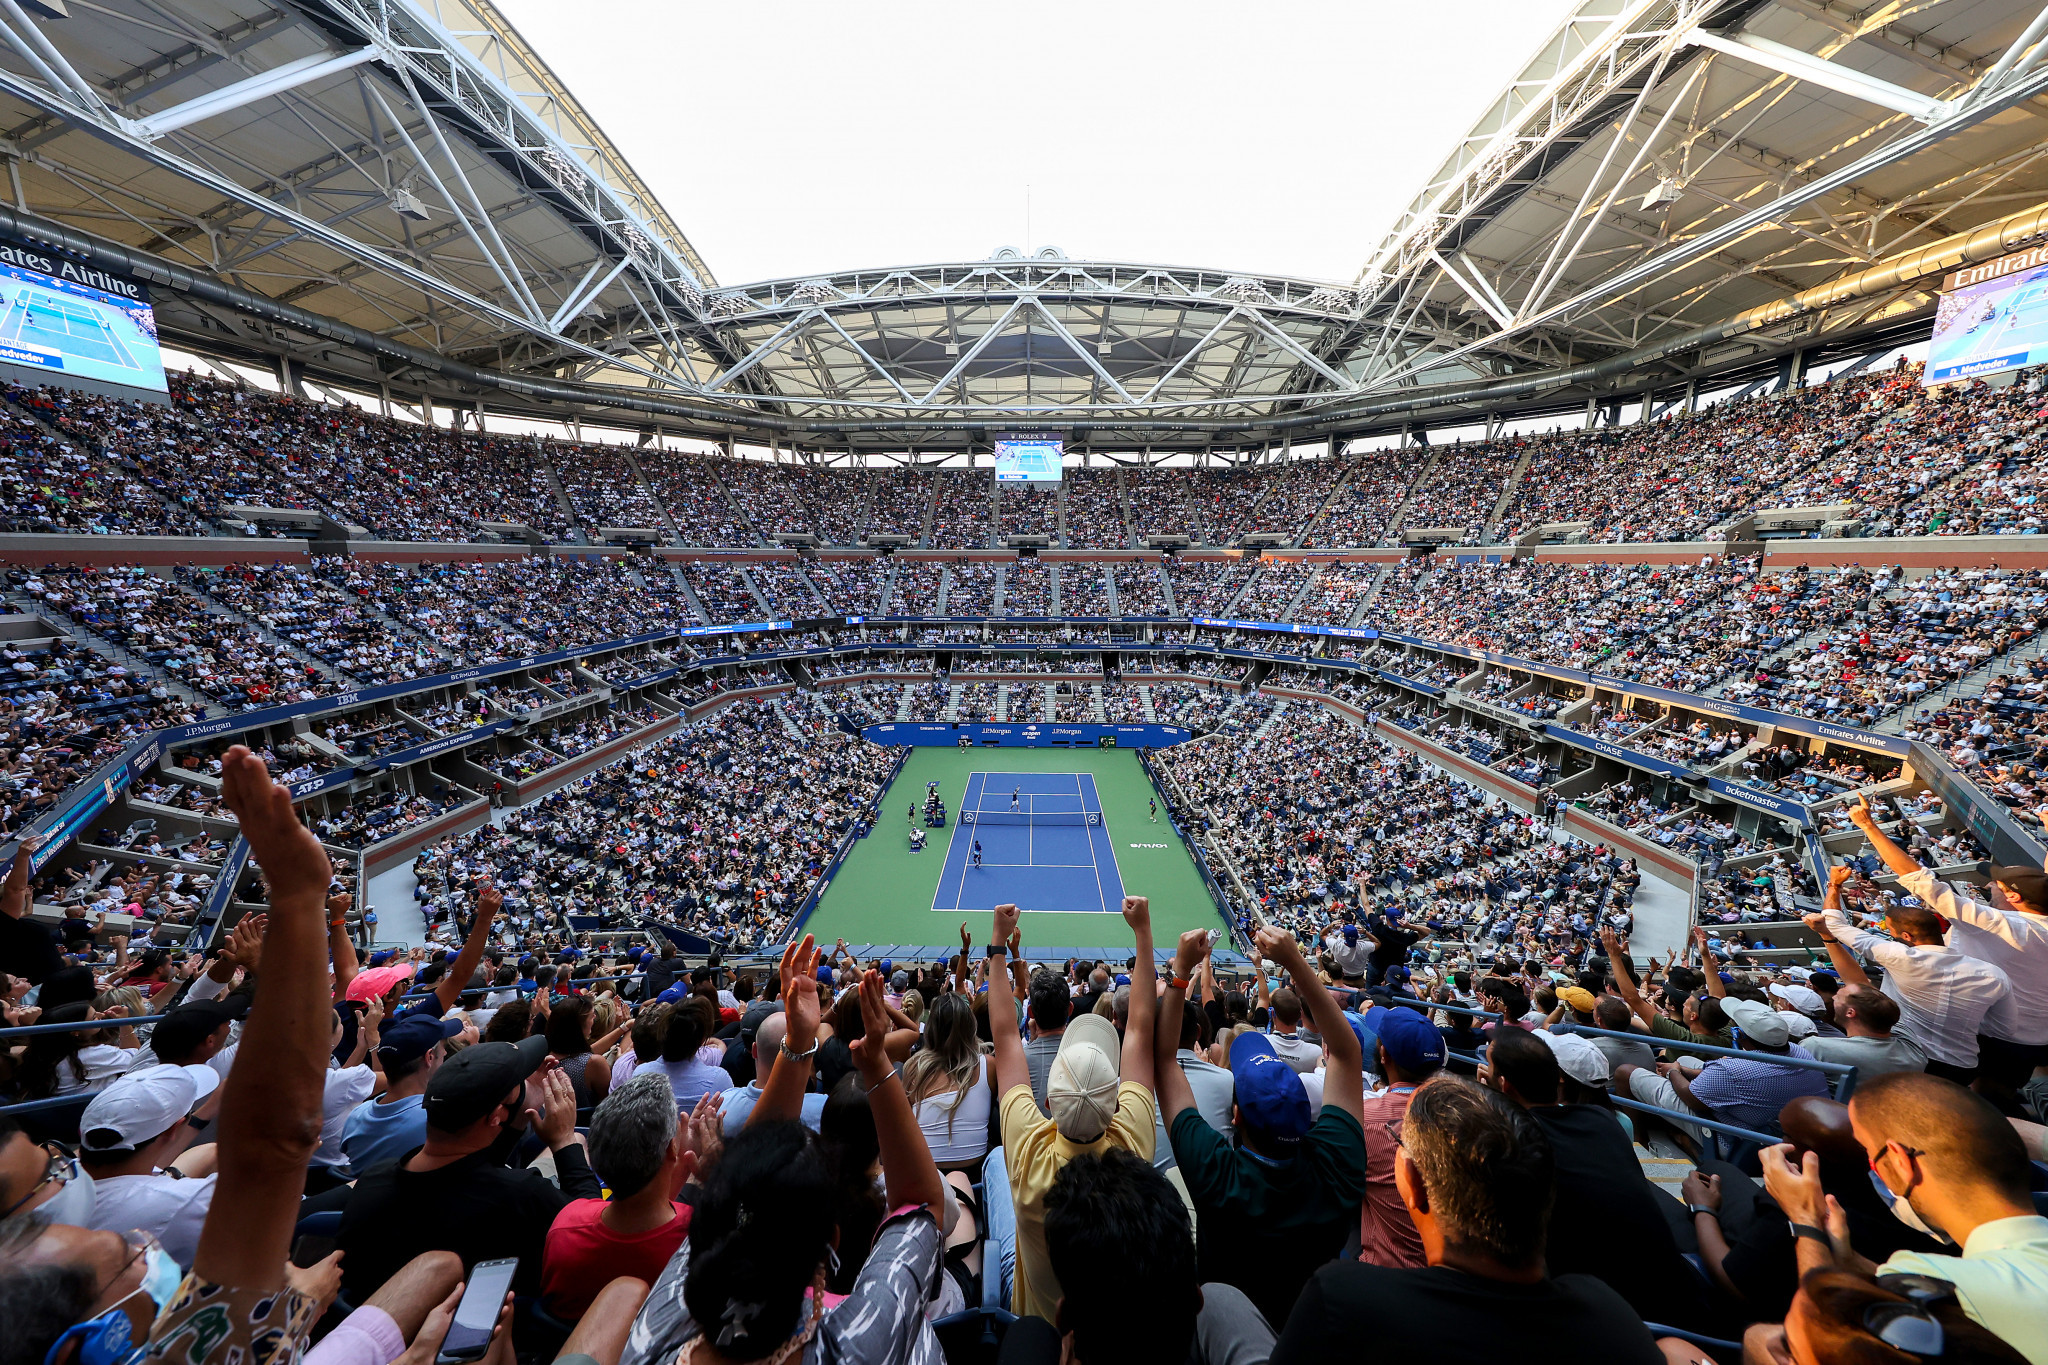 Russian players will be able to compete as neutrals at the US Open ©Getty Images